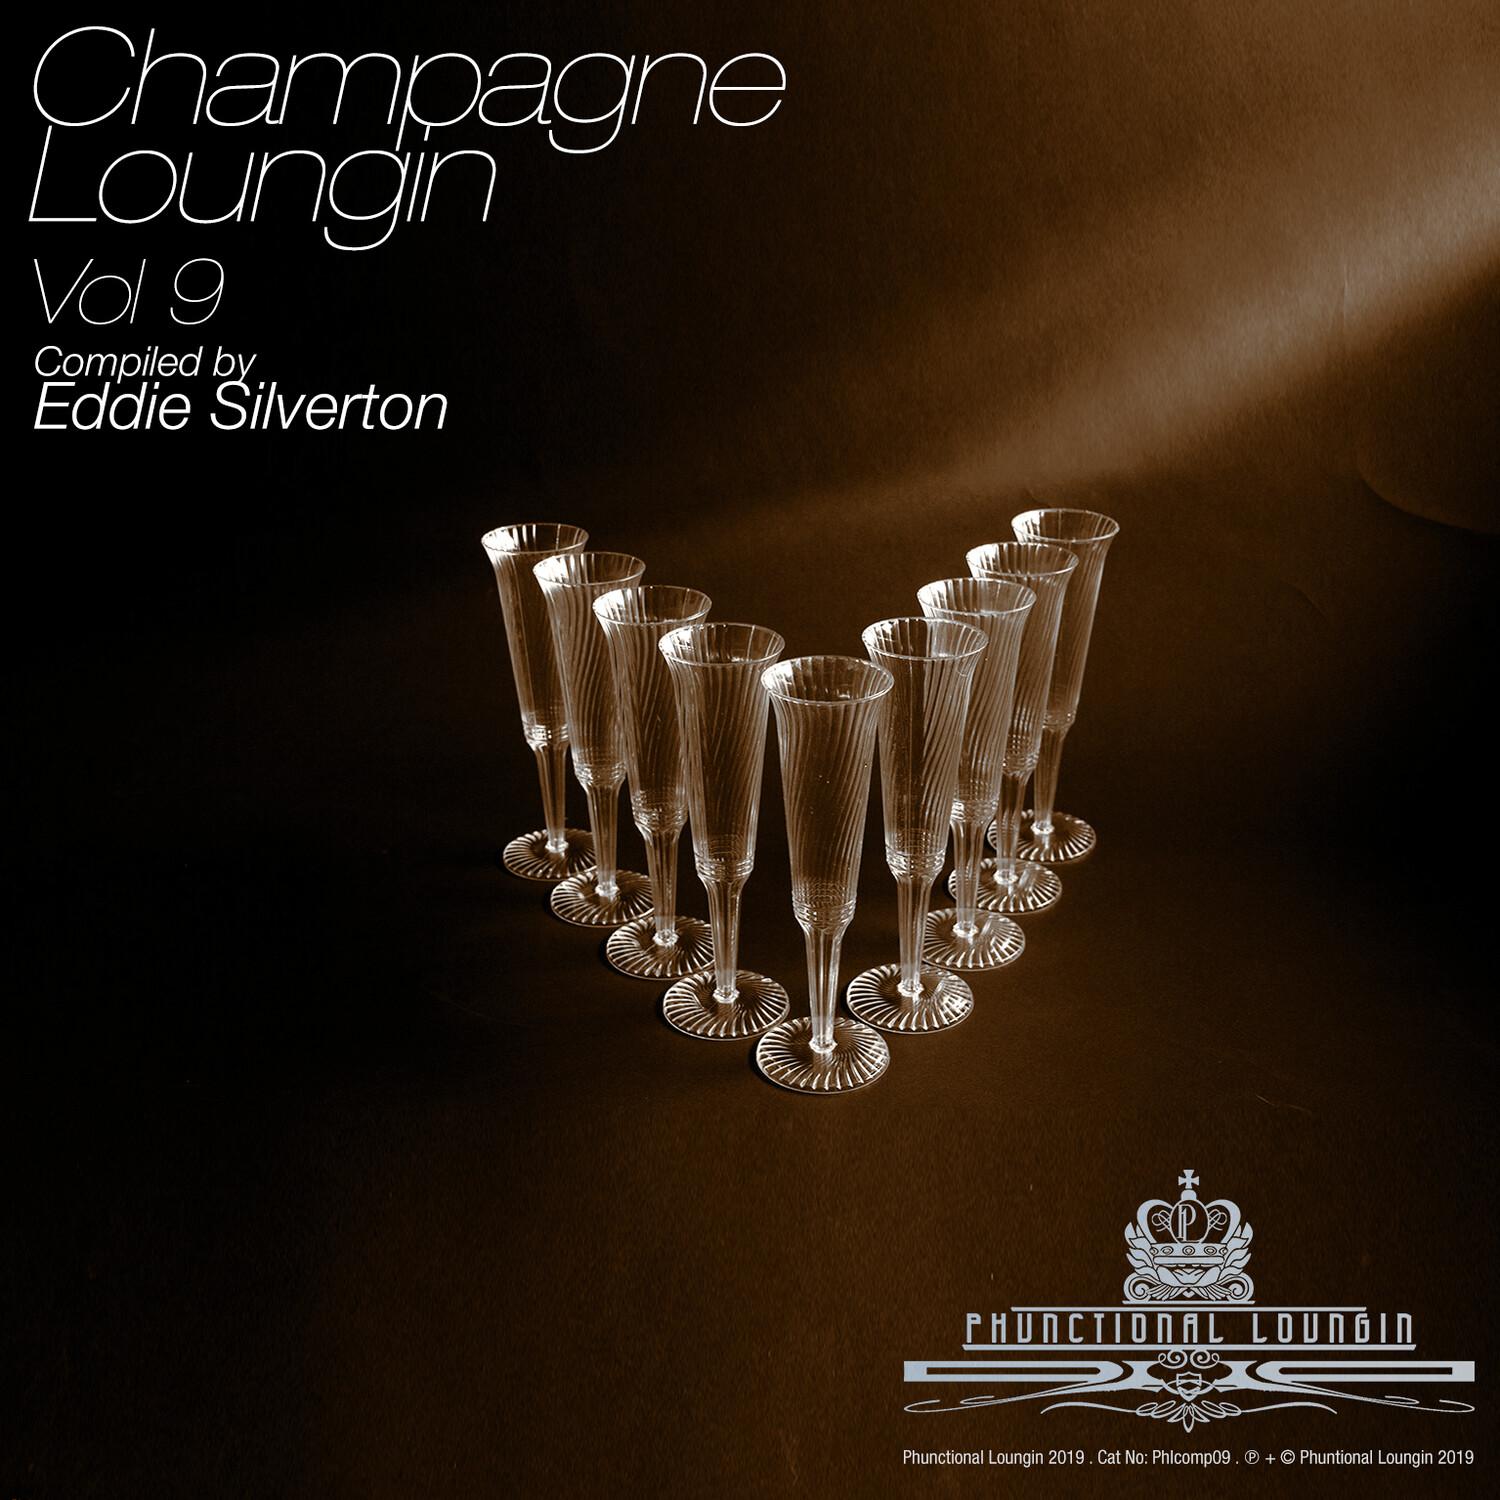 Champagne Loungin, Vol. 9 (Compiled by Eddie Silverton)